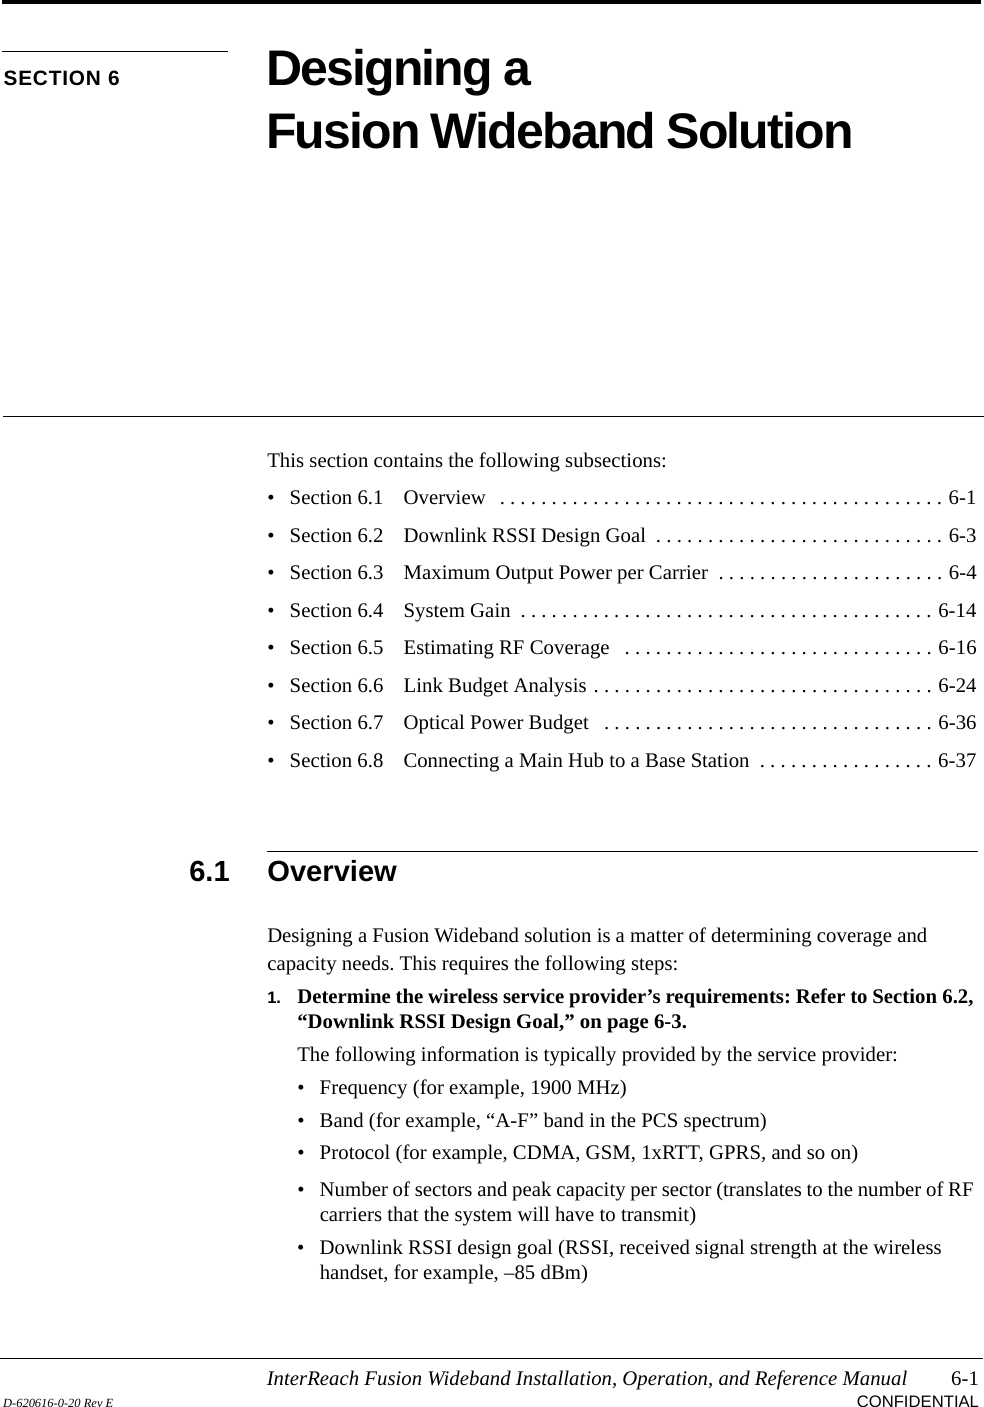 InterReach Fusion Wideband Installation, Operation, and Reference Manual 6-1D-620616-0-20 Rev E CONFIDENTIALSECTION 6 Designing a Fusion Wideband SolutionThis section contains the following subsections:• Section 6.1   Overview   . . . . . . . . . . . . . . . . . . . . . . . . . . . . . . . . . . . . . . . . . . . 6-1• Section 6.2   Downlink RSSI Design Goal  . . . . . . . . . . . . . . . . . . . . . . . . . . . . 6-3• Section 6.3   Maximum Output Power per Carrier  . . . . . . . . . . . . . . . . . . . . . . 6-4• Section 6.4   System Gain  . . . . . . . . . . . . . . . . . . . . . . . . . . . . . . . . . . . . . . . . 6-14• Section 6.5   Estimating RF Coverage   . . . . . . . . . . . . . . . . . . . . . . . . . . . . . . 6-16• Section 6.6   Link Budget Analysis . . . . . . . . . . . . . . . . . . . . . . . . . . . . . . . . . 6-24• Section 6.7   Optical Power Budget   . . . . . . . . . . . . . . . . . . . . . . . . . . . . . . . . 6-36• Section 6.8   Connecting a Main Hub to a Base Station  . . . . . . . . . . . . . . . . . 6-376.1 OverviewDesigning a Fusion Wideband solution is a matter of determining coverage and capacity needs. This requires the following steps:1. Determine the wireless service provider’s requirements: Refer to Section 6.2, “Downlink RSSI Design Goal,” on page 6-3.The following information is typically provided by the service provider:• Frequency (for example, 1900 MHz)• Band (for example, “A-F” band in the PCS spectrum)• Protocol (for example, CDMA, GSM, 1xRTT, GPRS, and so on)• Number of sectors and peak capacity per sector (translates to the number of RF carriers that the system will have to transmit)• Downlink RSSI design goal (RSSI, received signal strength at the wireless handset, for example, –85 dBm)